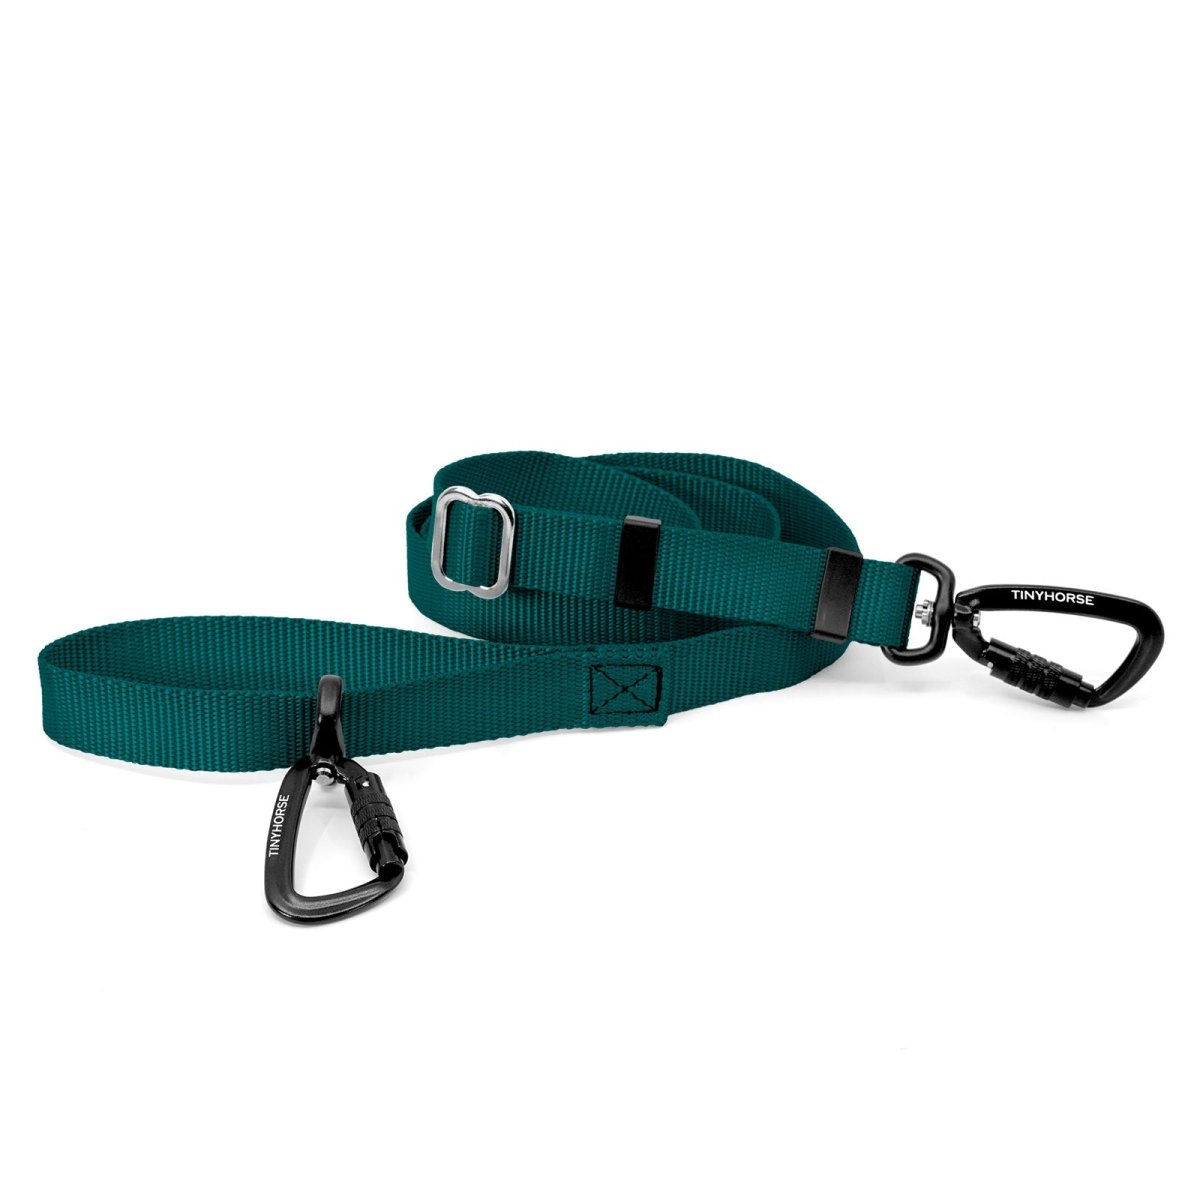 A teal-coloured Lead-All Lite Extra with an adjustable nylon webbing leash and 2 auto-locking carabiners